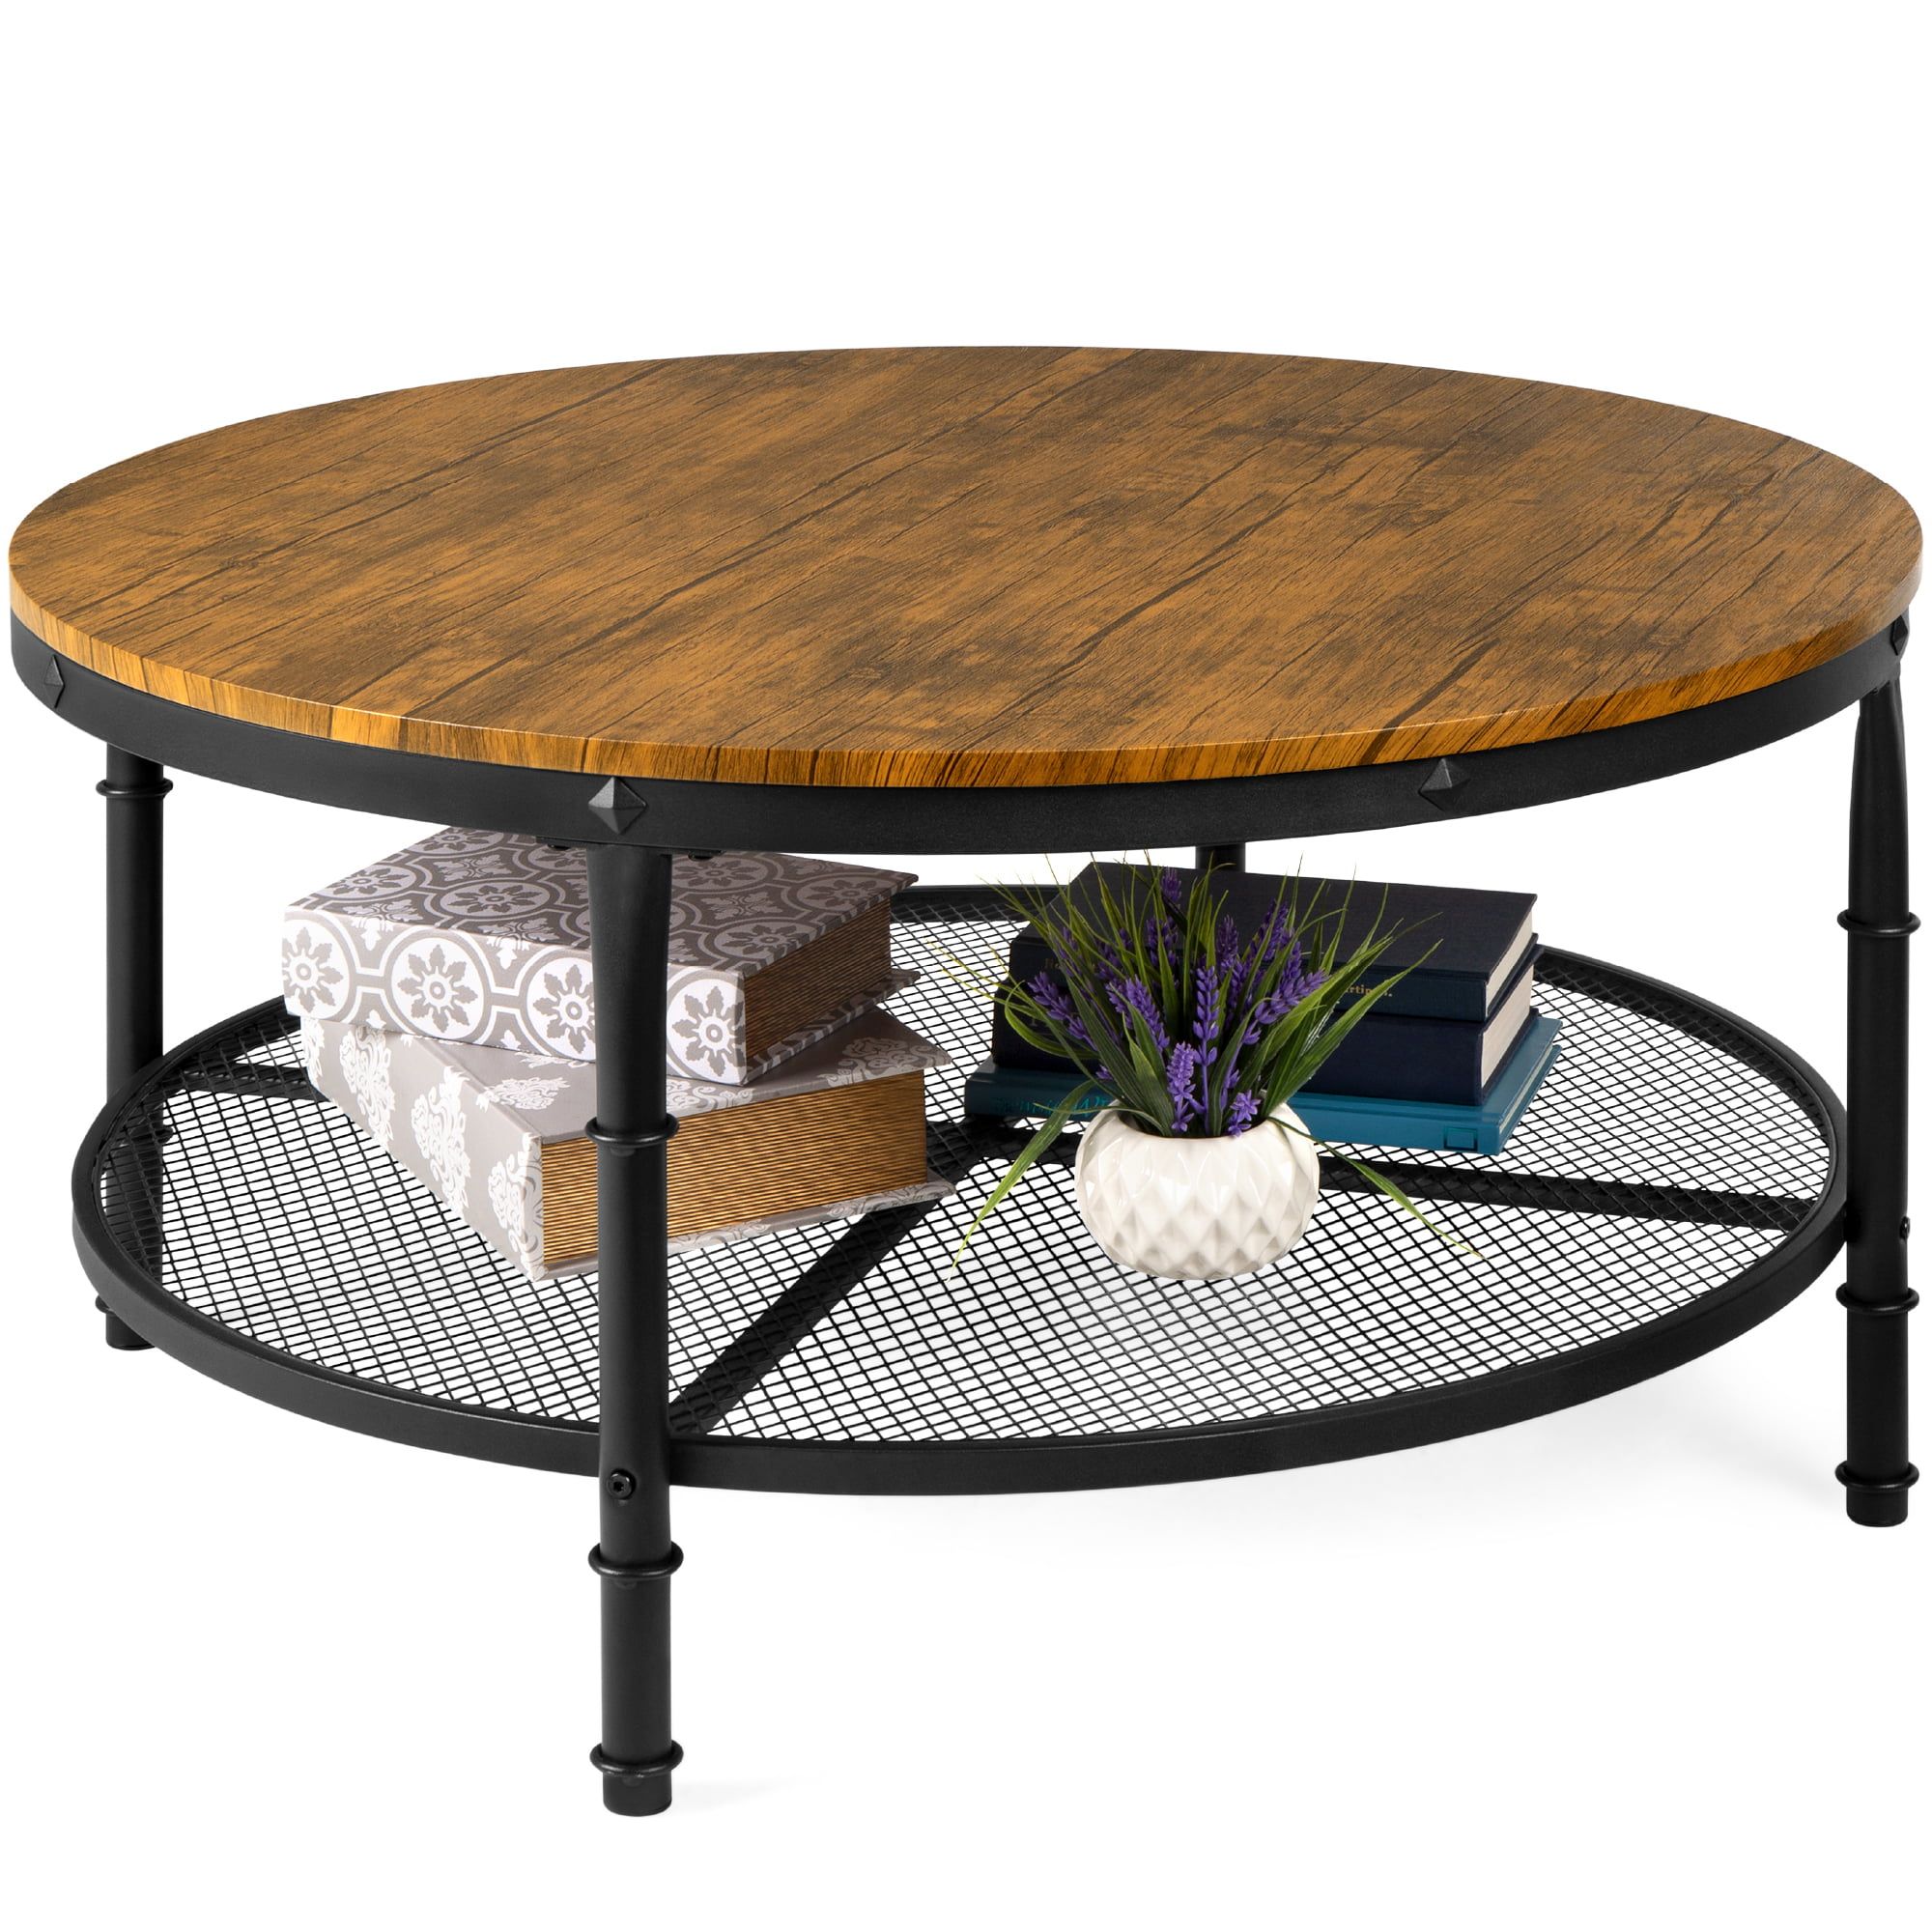 Best Choice Products 2 Tier Round Coffee Table, Rustic Steel Accent Regarding Coffee Tables With Round Wooden Tops (View 5 of 15)